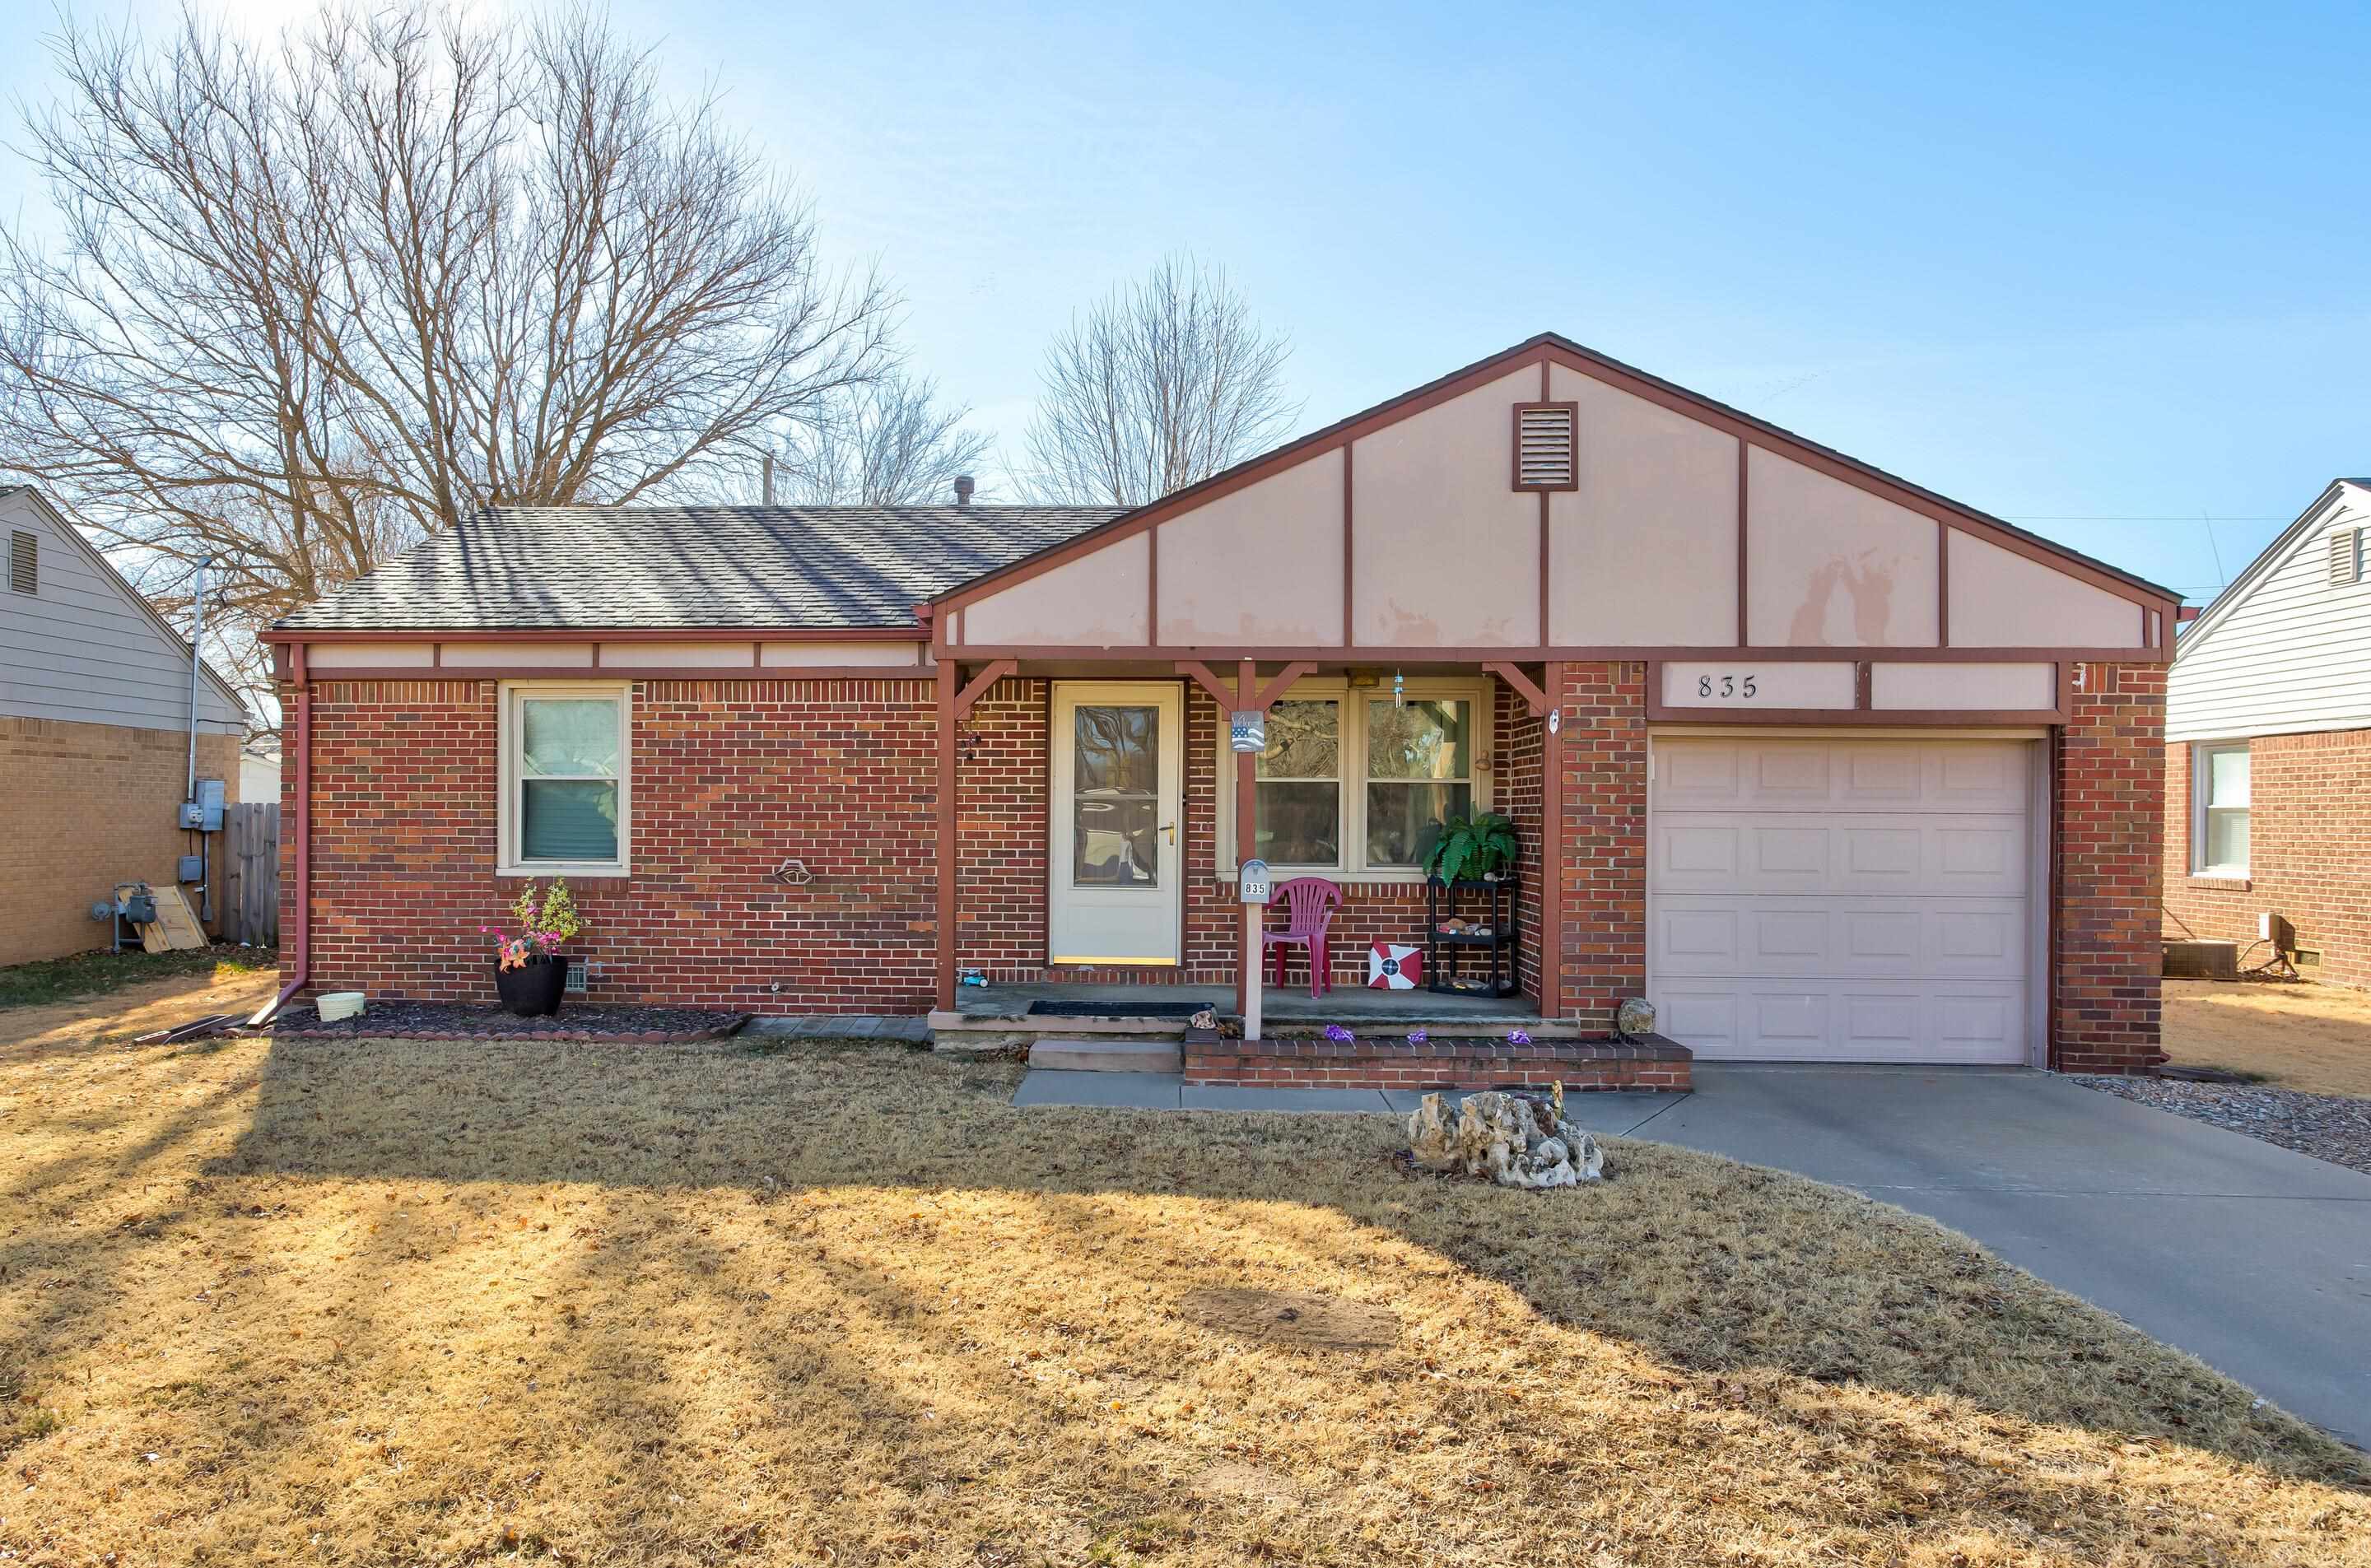 This all brick home is a GEM!   Very well maintained and move in ready.     Wood floor entry welcome